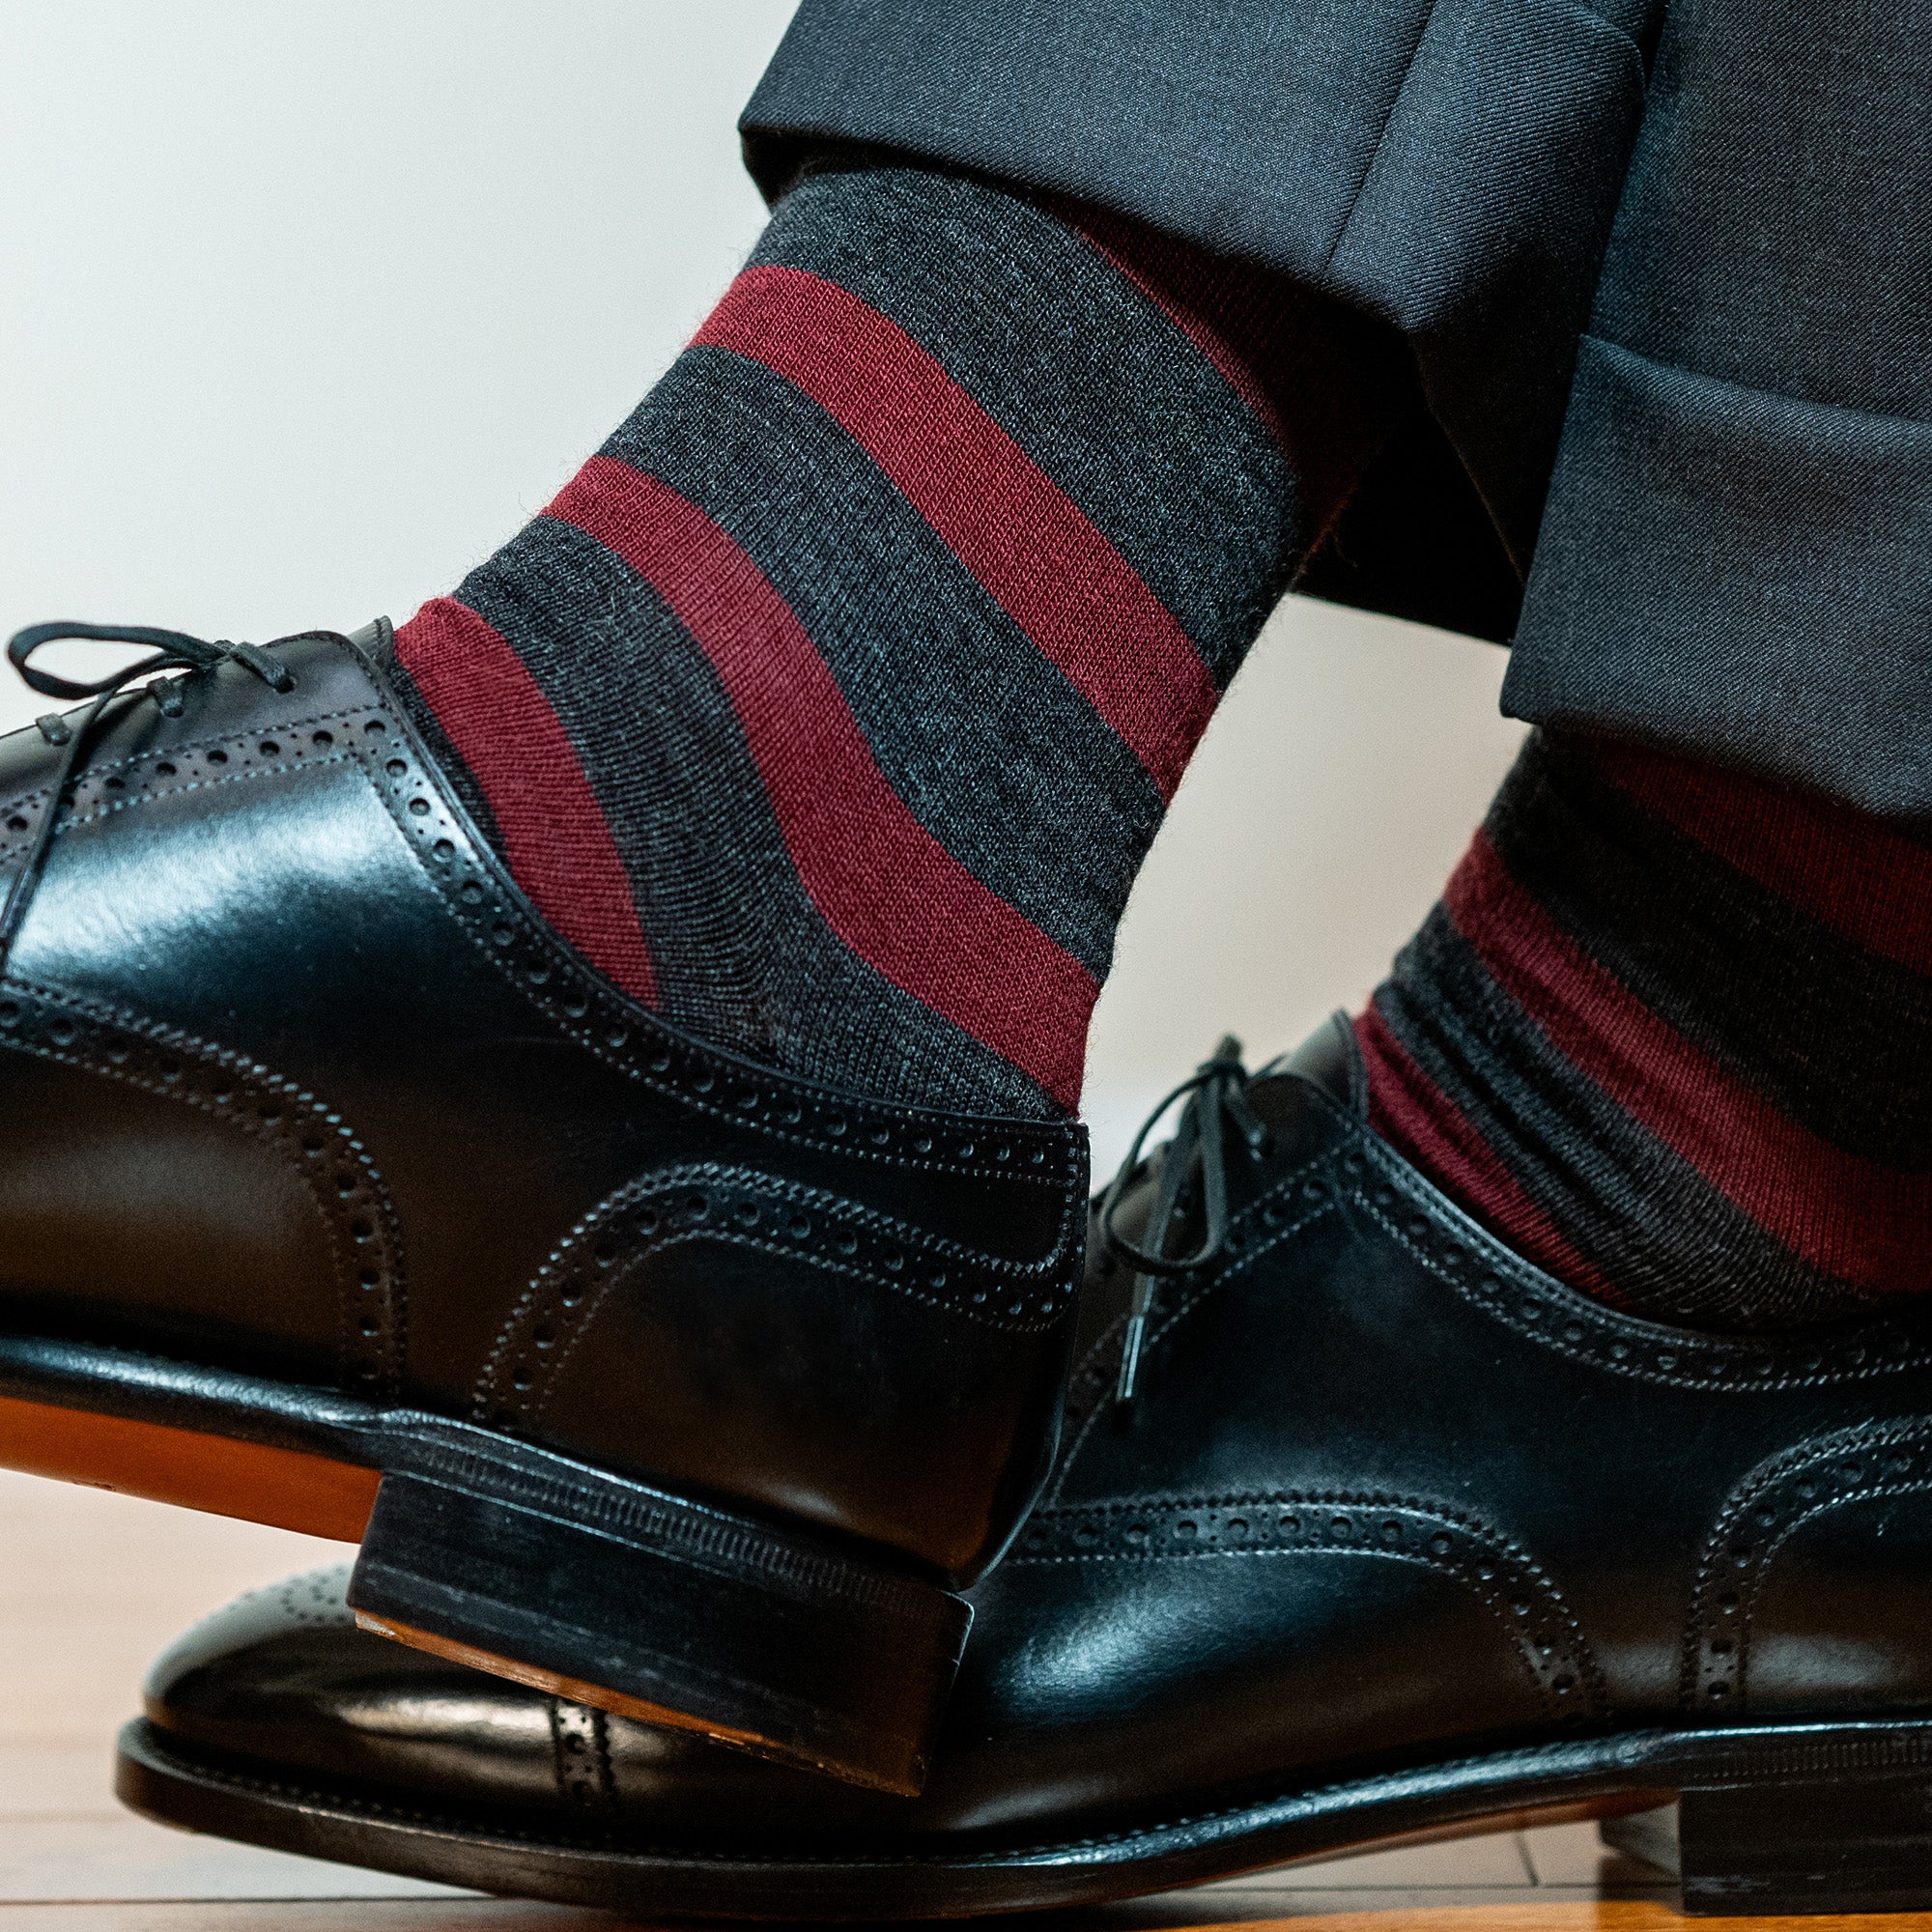 man wearing burgundy and charcoal striped dress socks with black oxfords crossing ankles